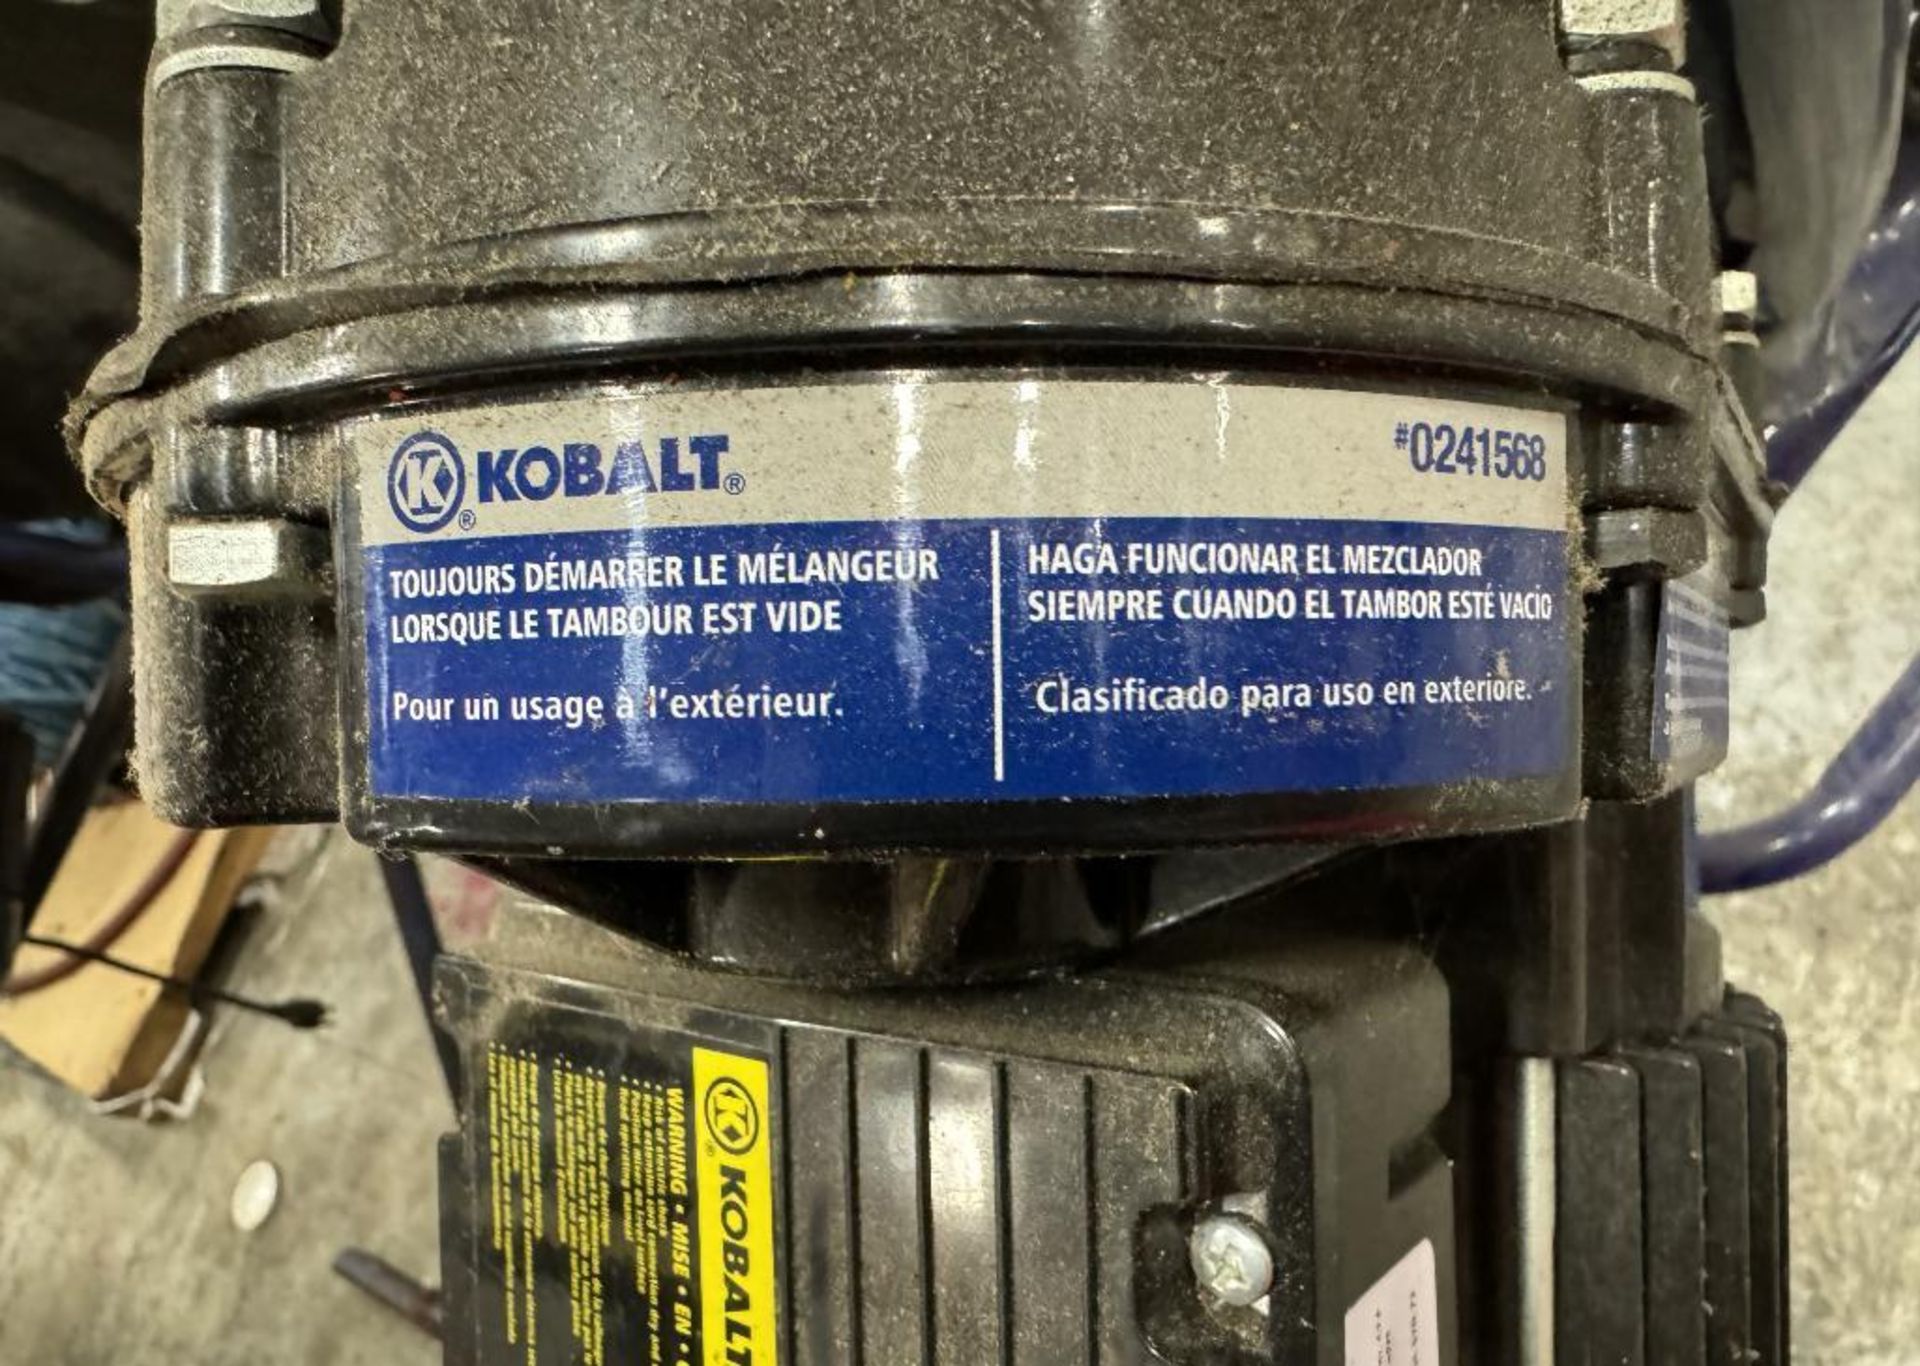 Lot Of (2) Kobalt Approximate 4 Cubic Foot Concrete Mixers, Model 0241568. - Image 4 of 6